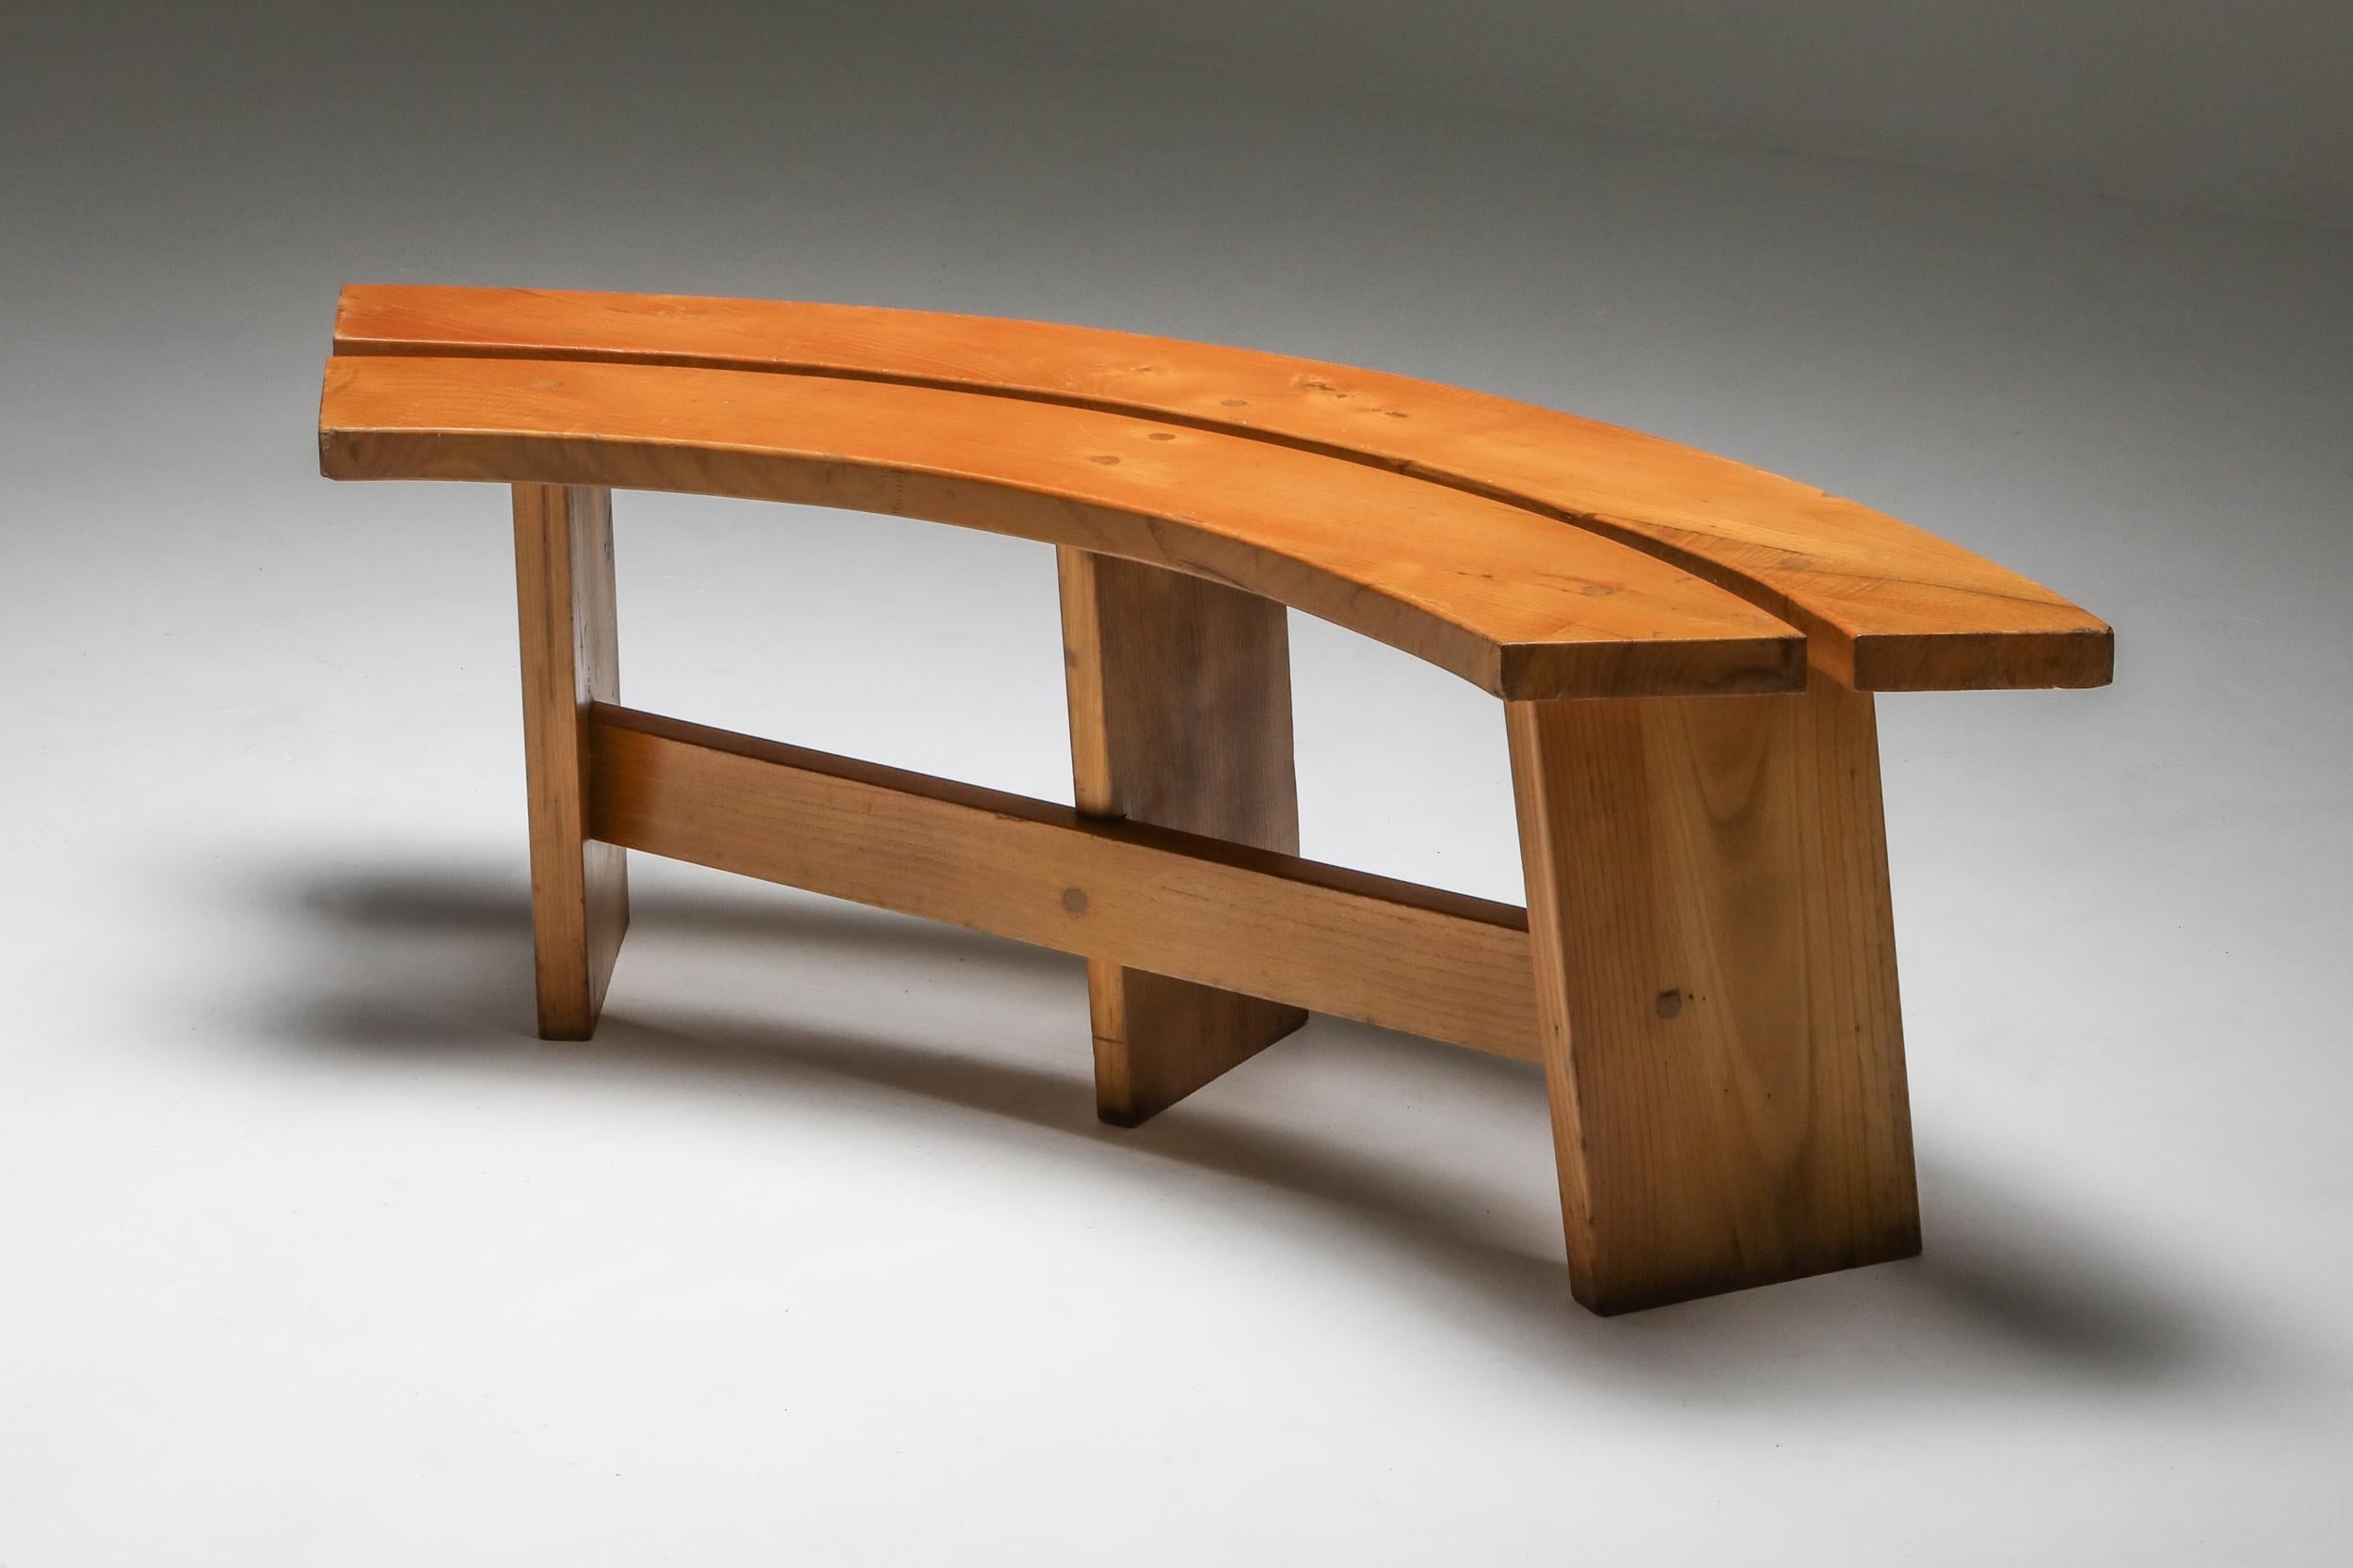 Chapo Pierre, French elm, bench, Mid-Century Modern, France, 1960s.
Made of solid elmwood.
These benches are another great example of the quality and craftsmanship of Pierre Chapo
Measures: One piece H 46 cm, D 46 cm, W 129 cm.

          